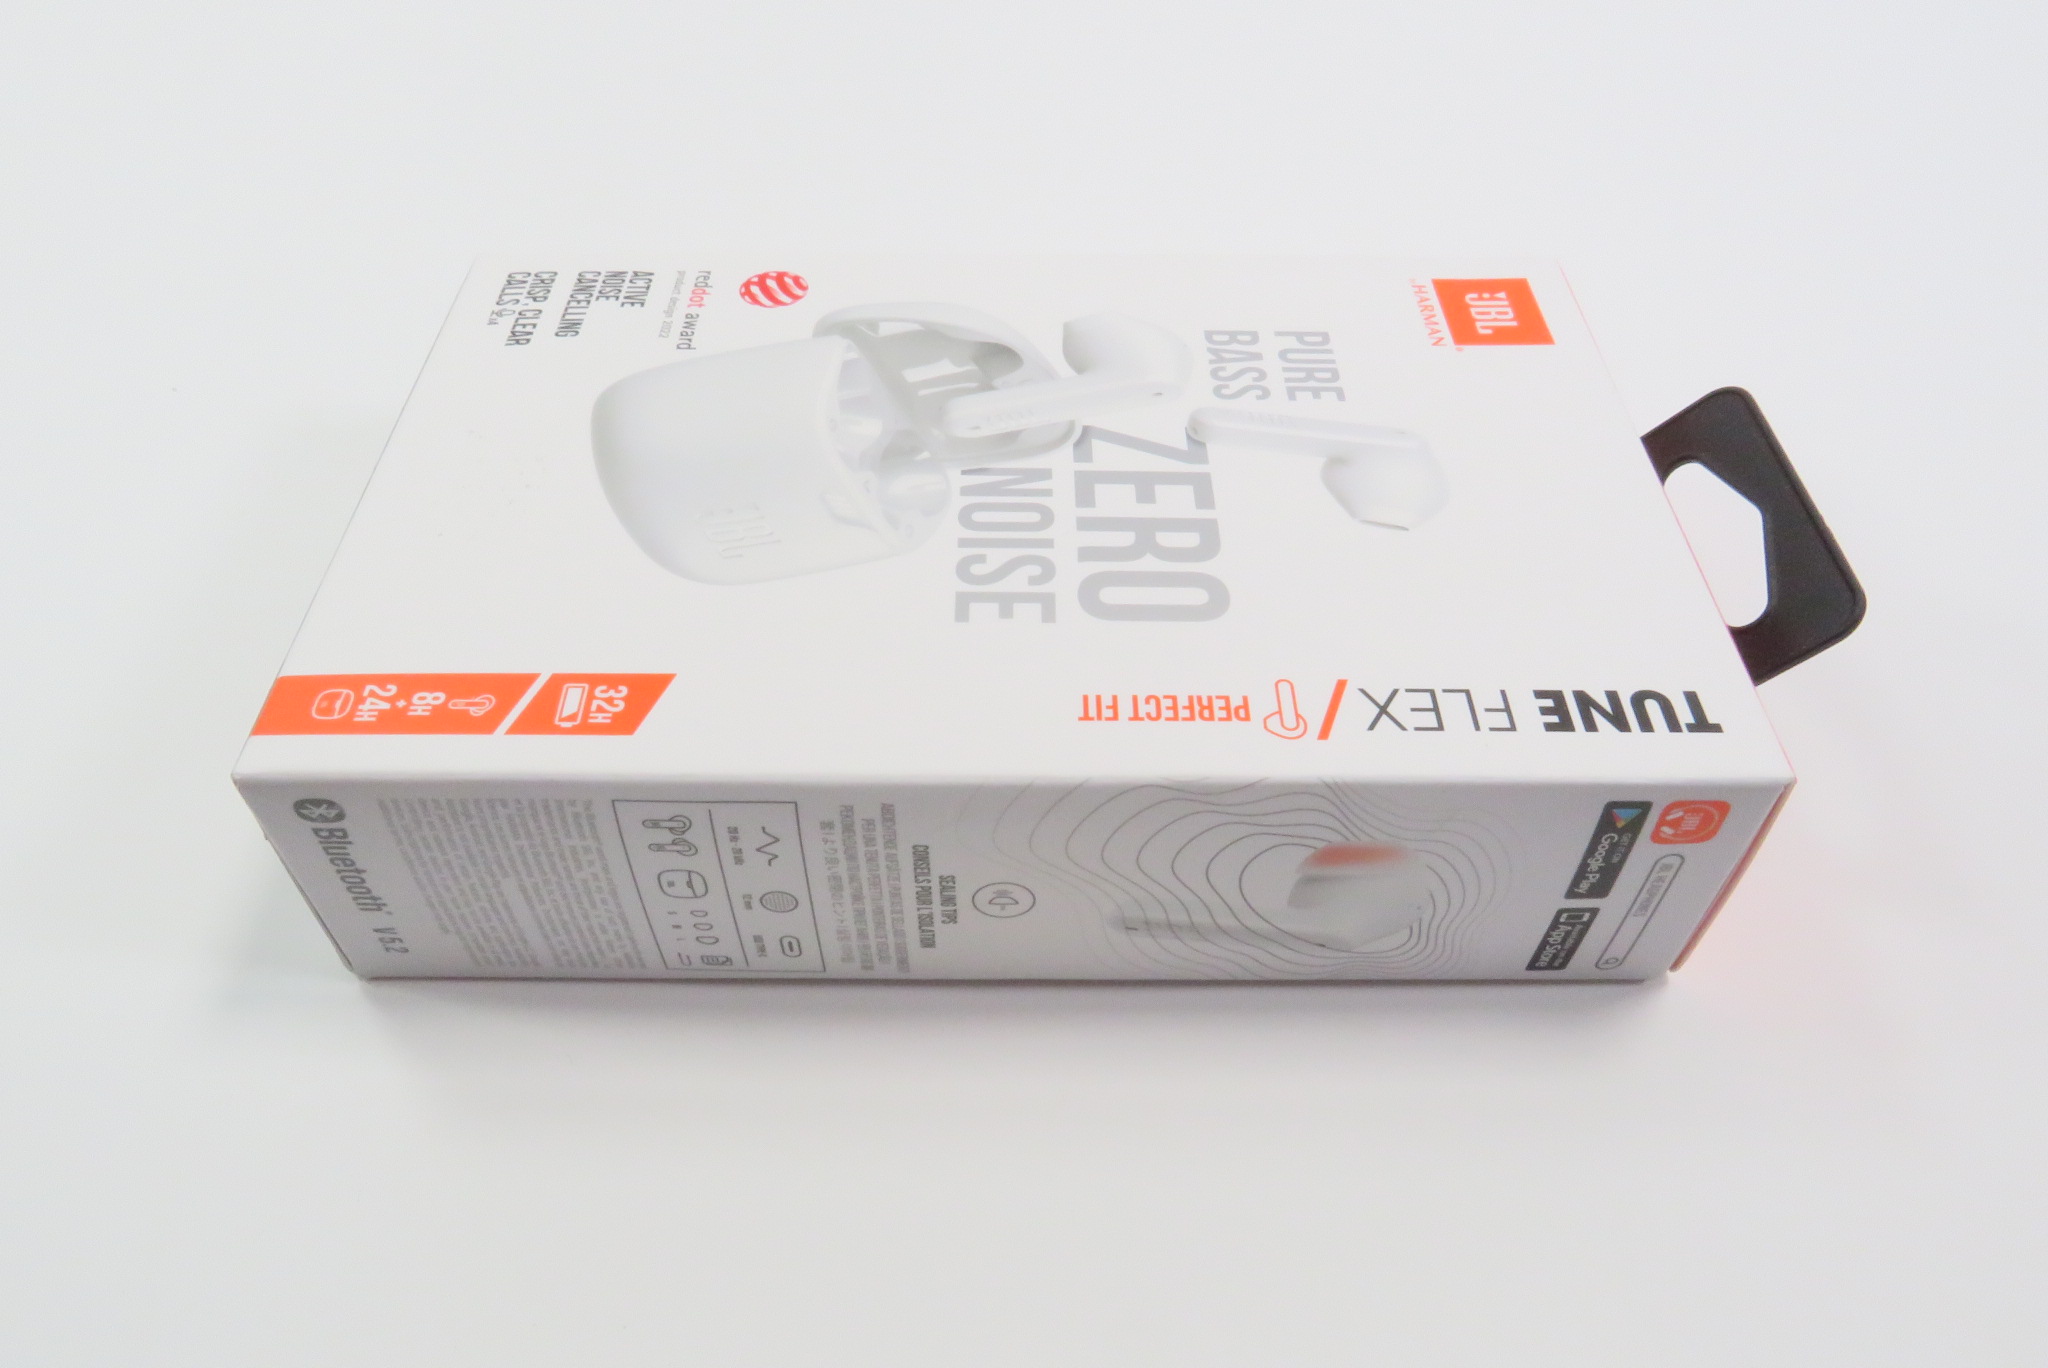 JBL Tune Flex Active Noise Cancelling Wireless Earbuds